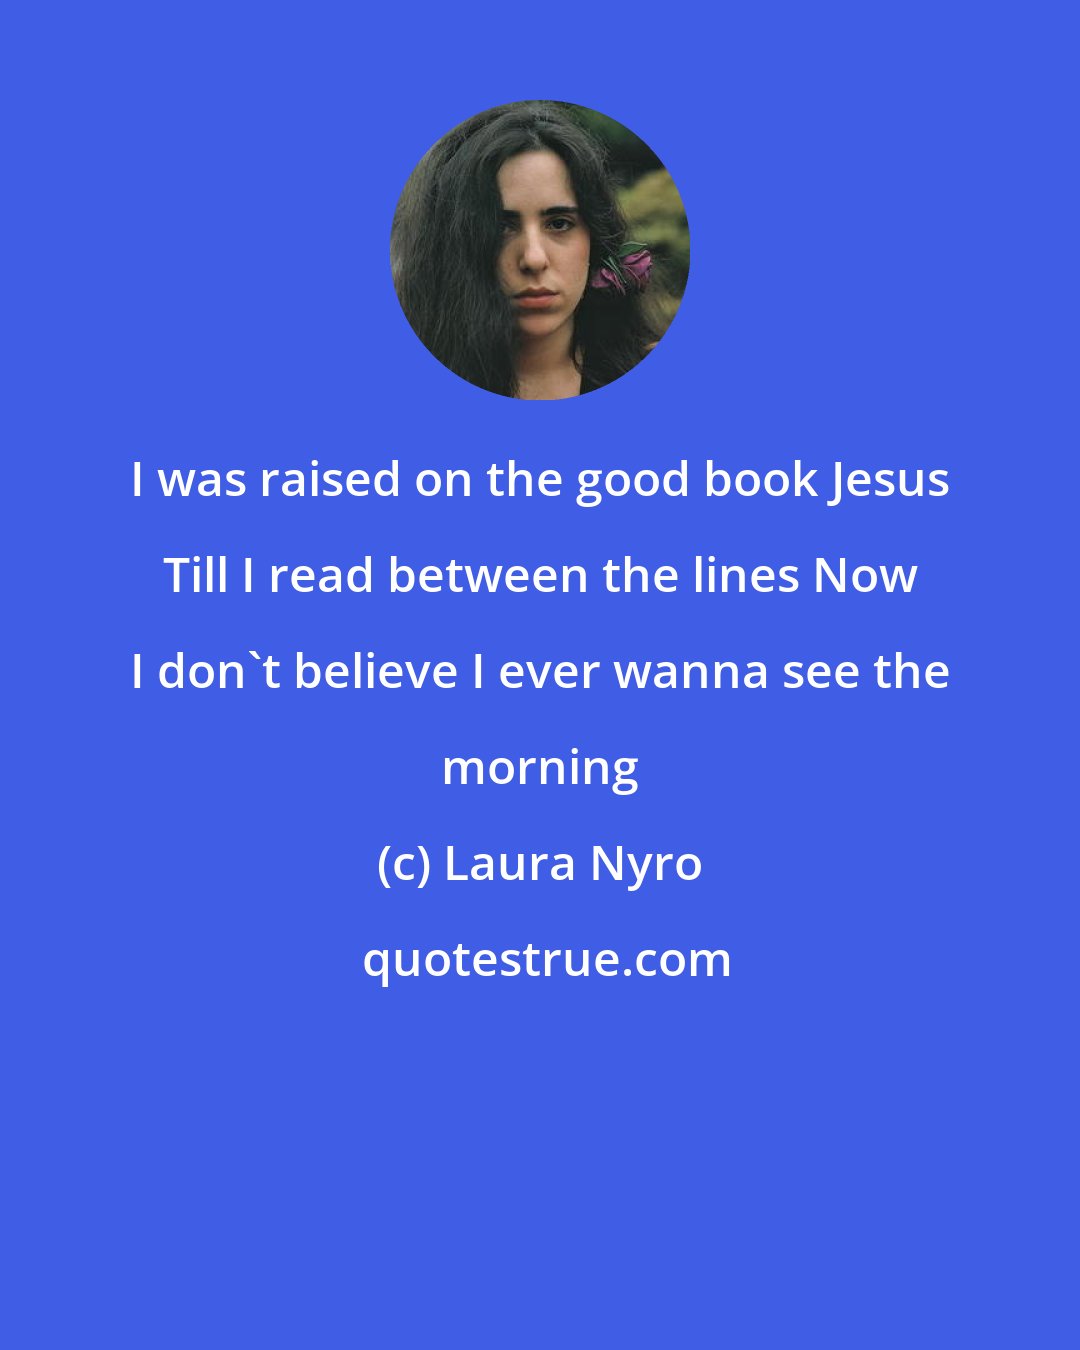 Laura Nyro: I was raised on the good book Jesus Till I read between the lines Now I don't believe I ever wanna see the morning